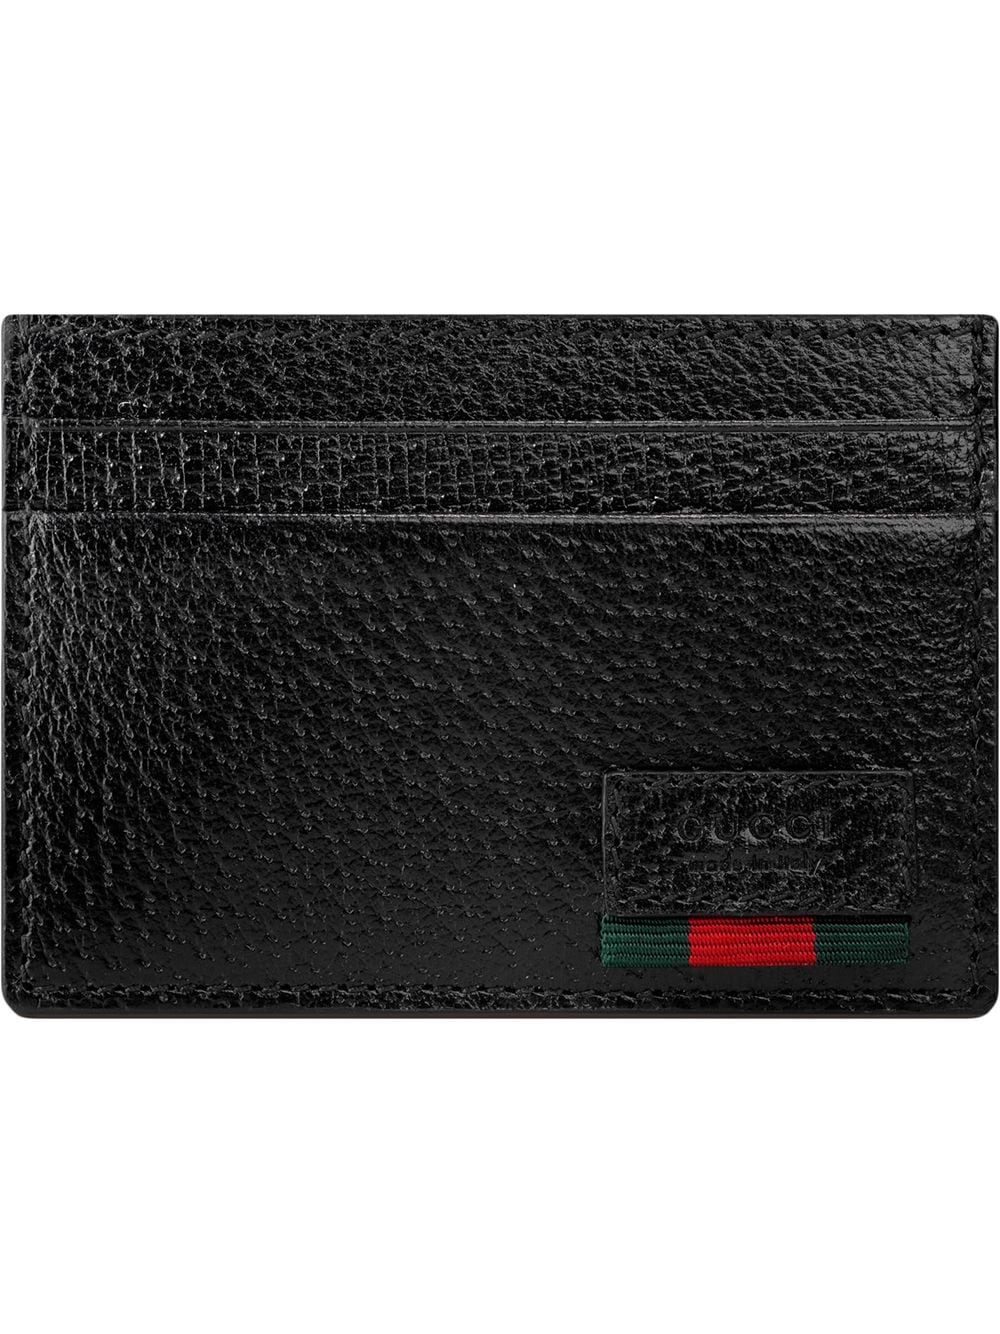 Gucci Leather Money Clip With Web Ss20 